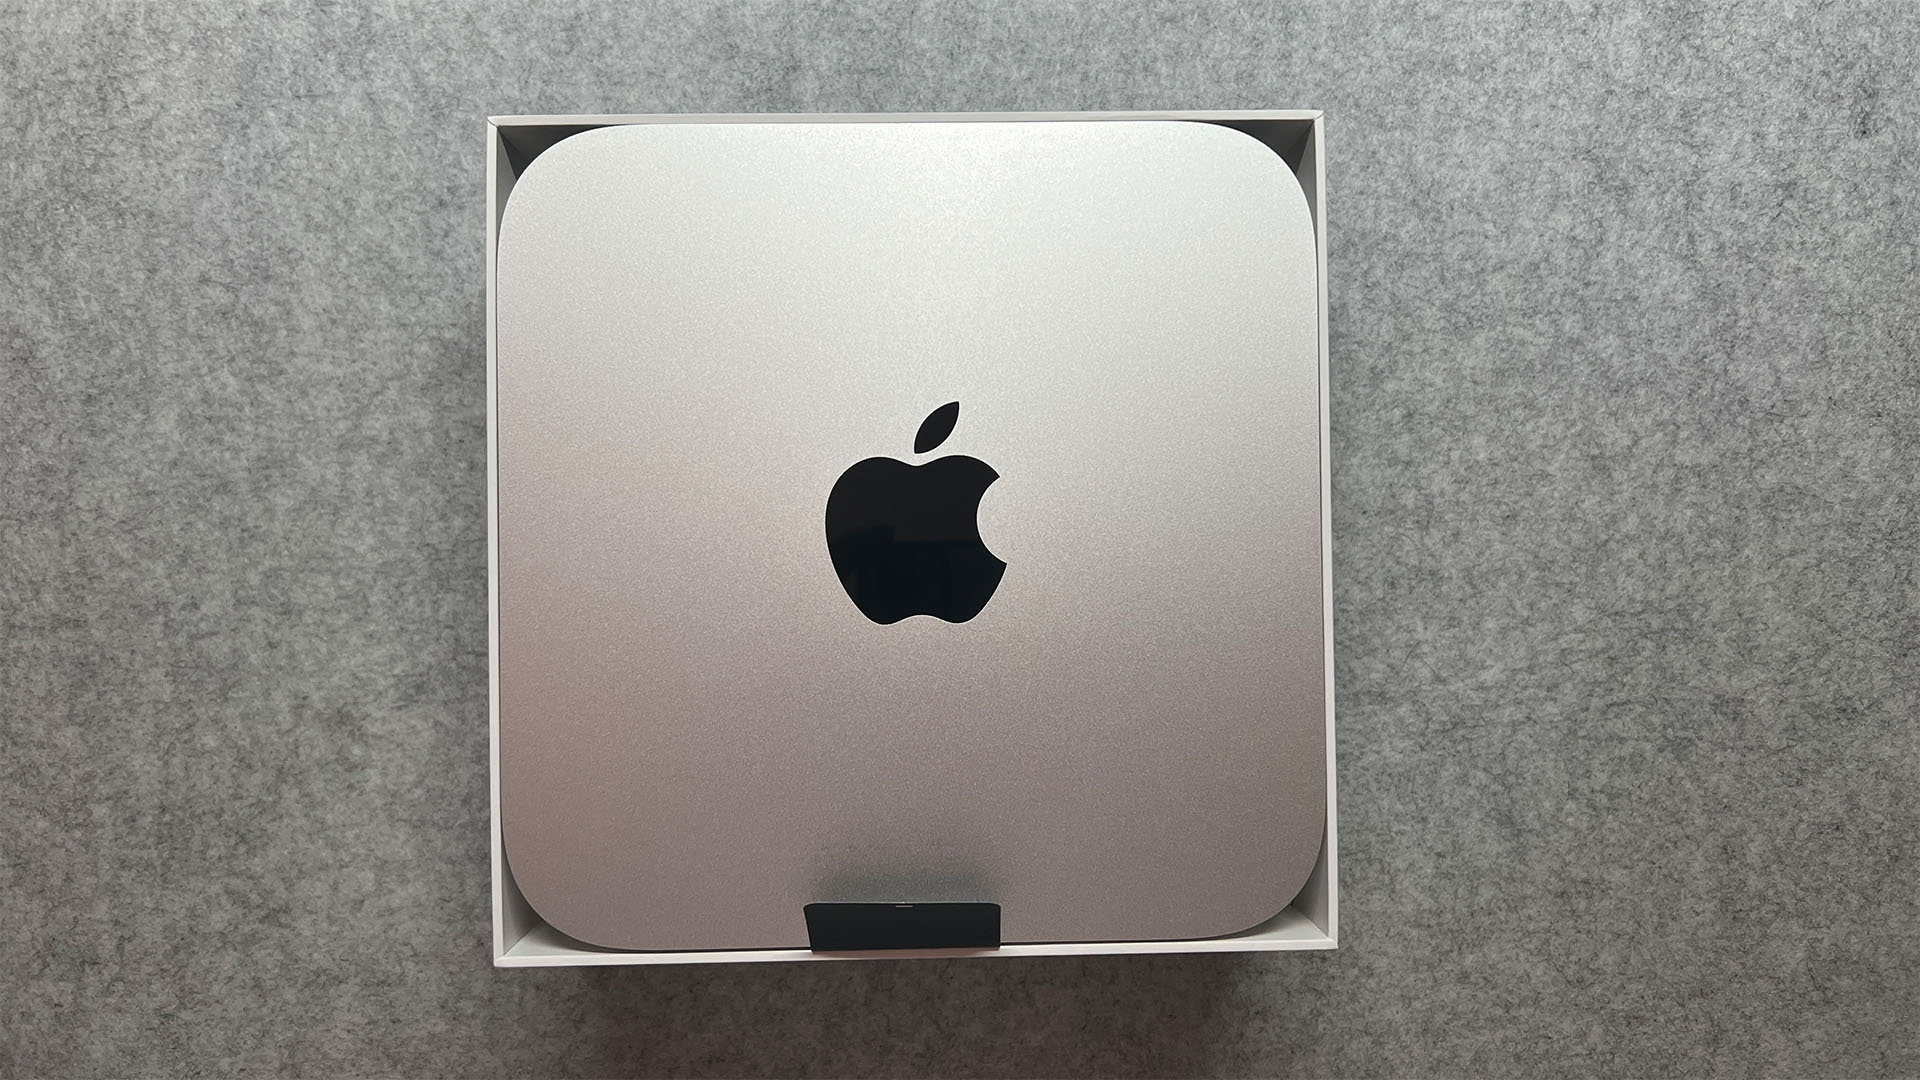 The Mac Mini Pro M2 is mini pc. It's a thin, square shape with rounded corners (20 x 20 x 3.5 cm). It's silver in color and has the Apple logo in the center of it (a black apple with a bite taken out of it). It is snuggly inside a square box.